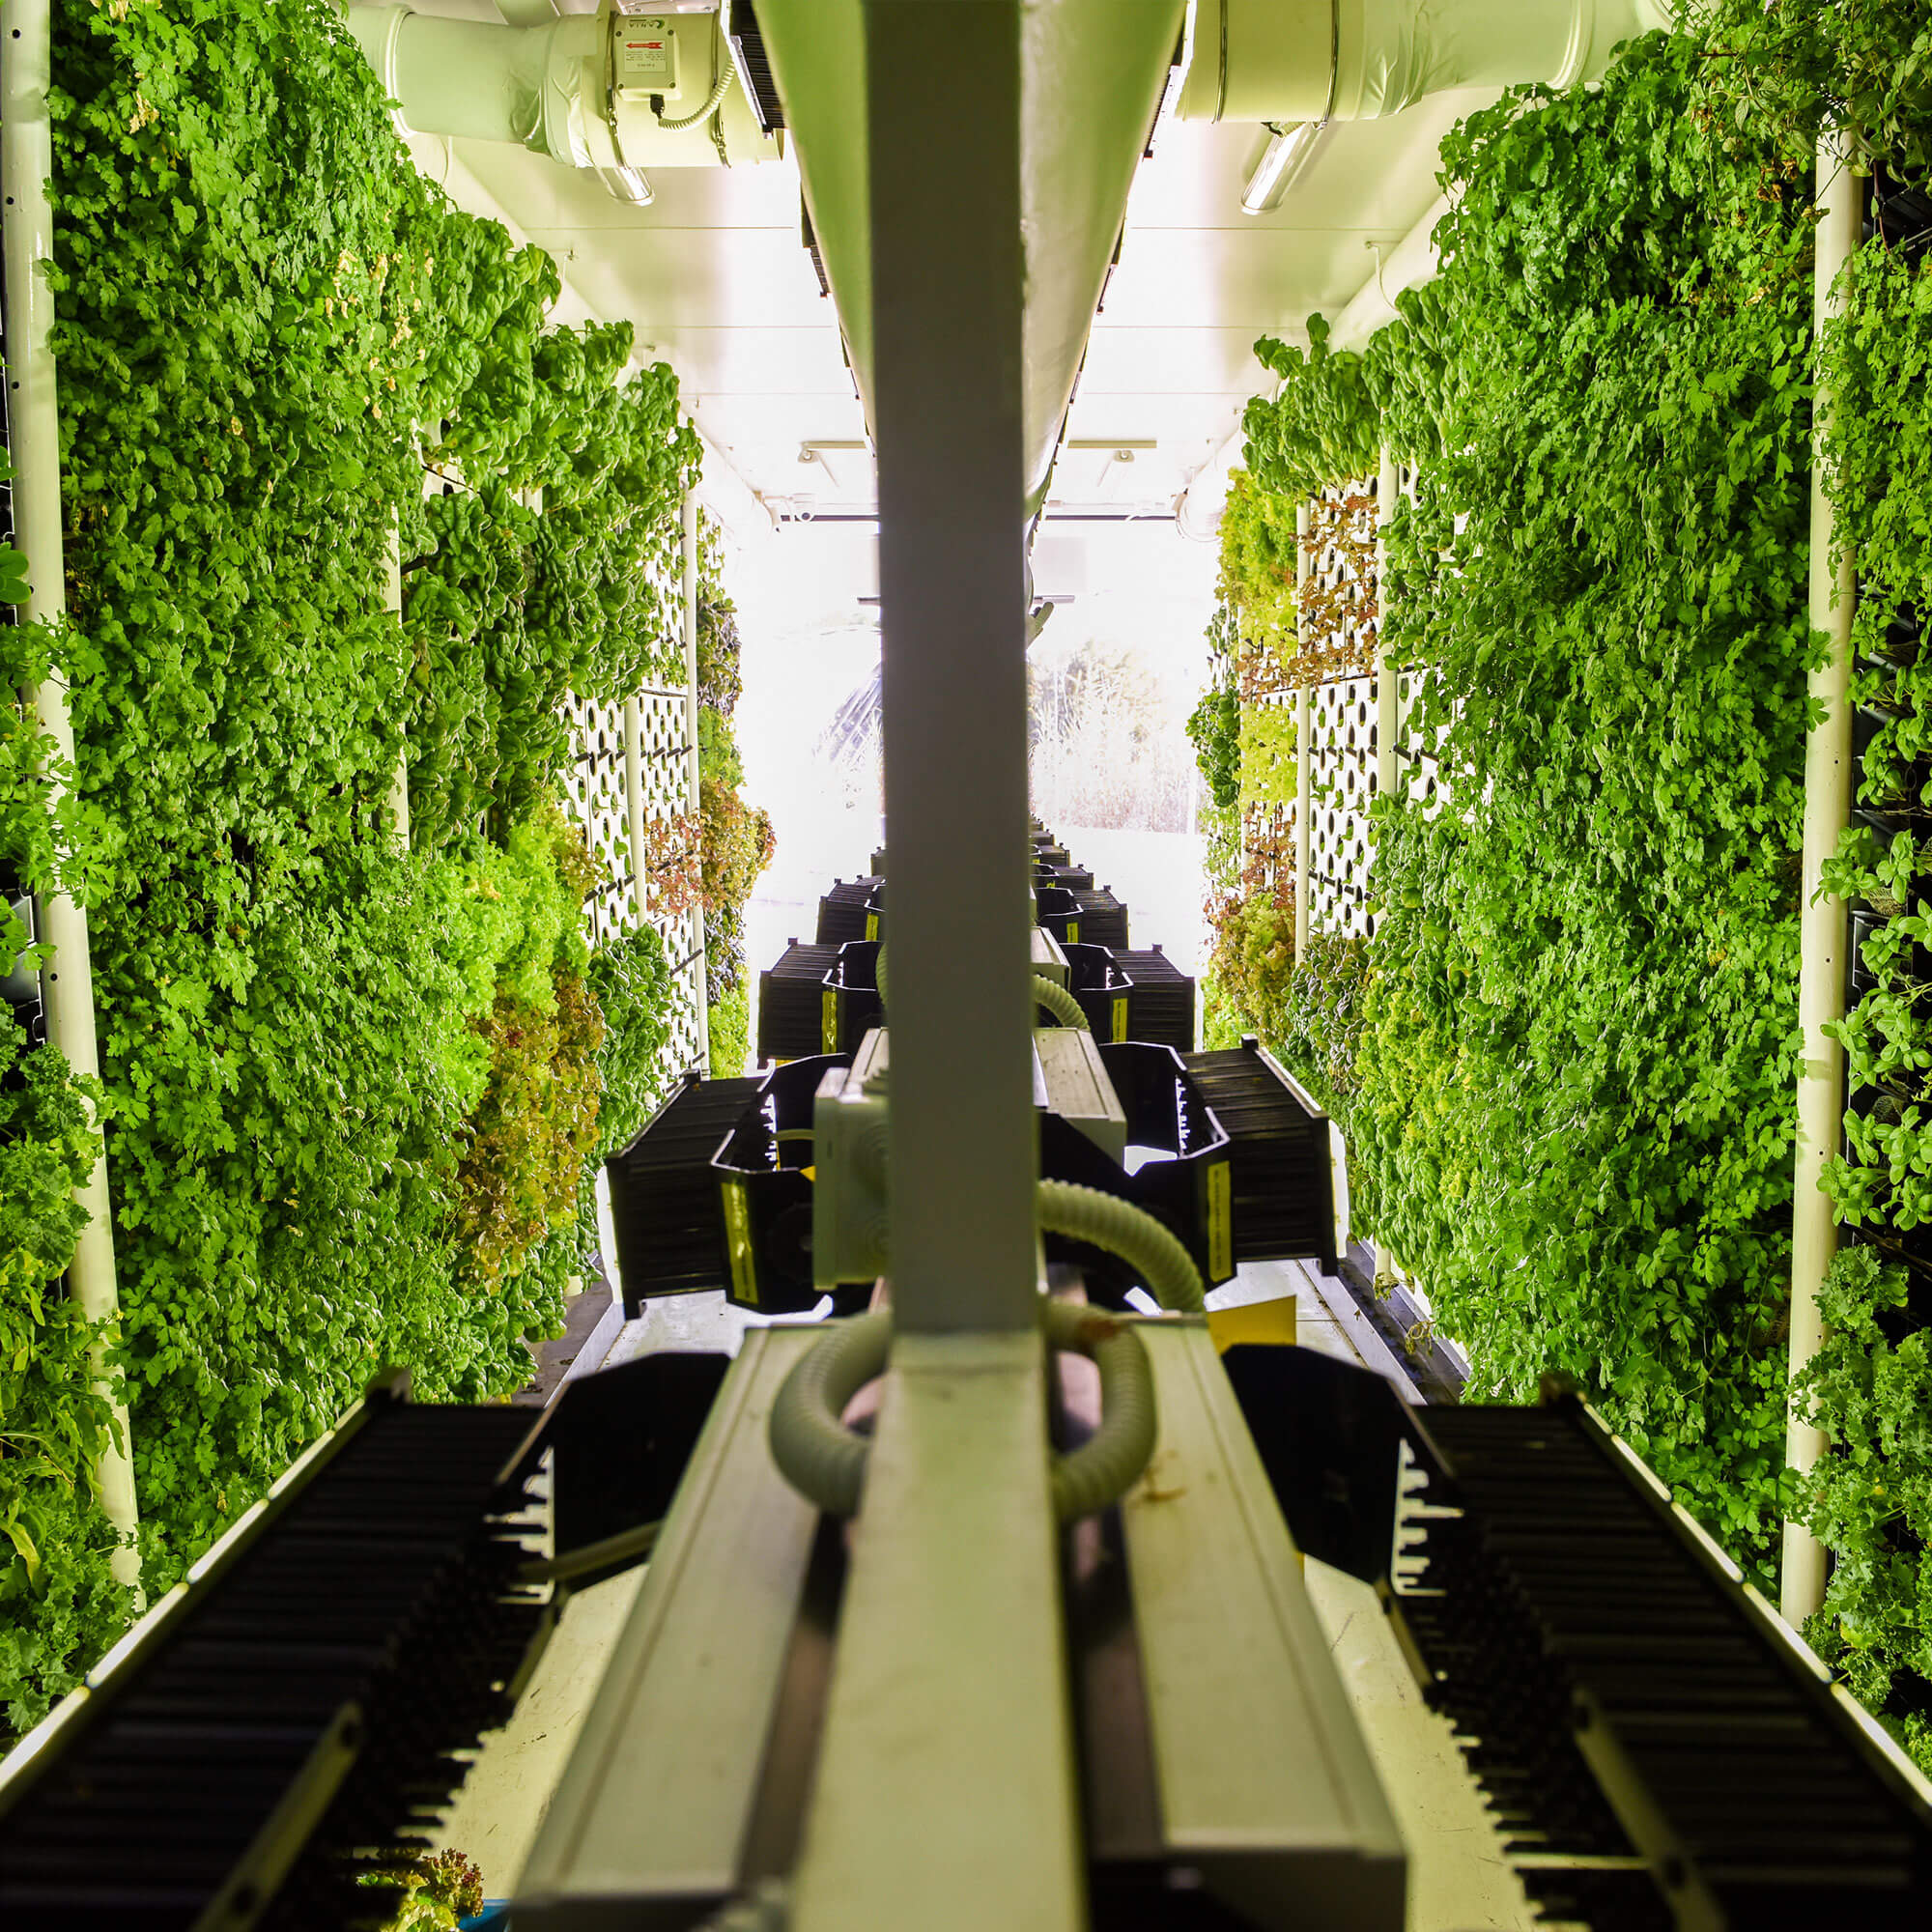 VERTICAL AGRICULTURE